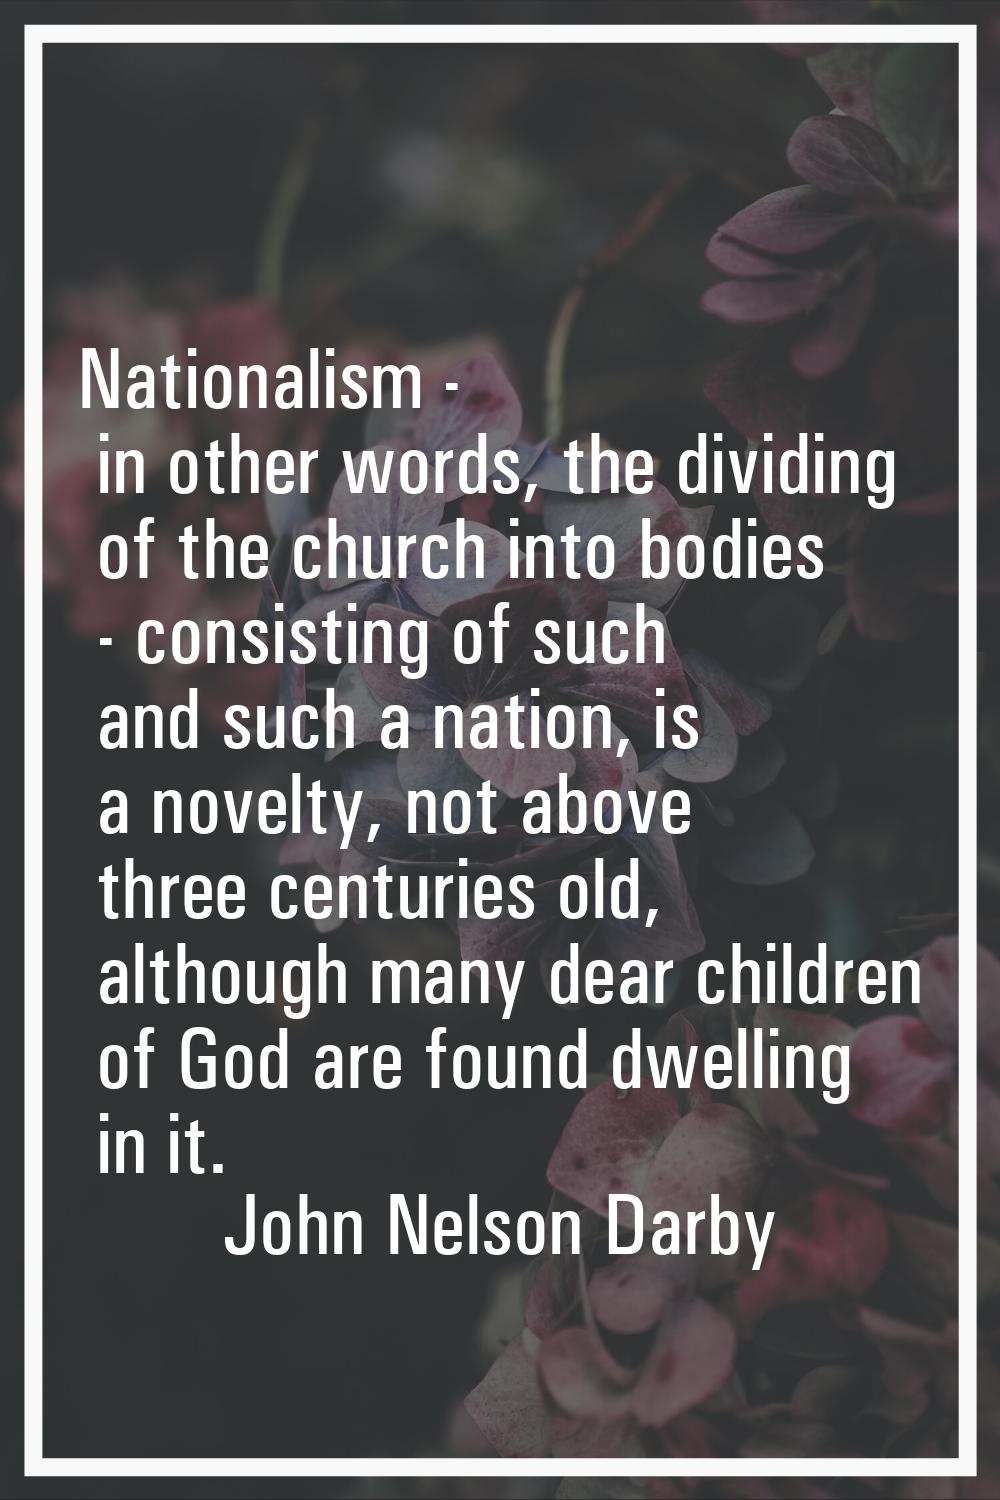 Nationalism - in other words, the dividing of the church into bodies - consisting of such and such 